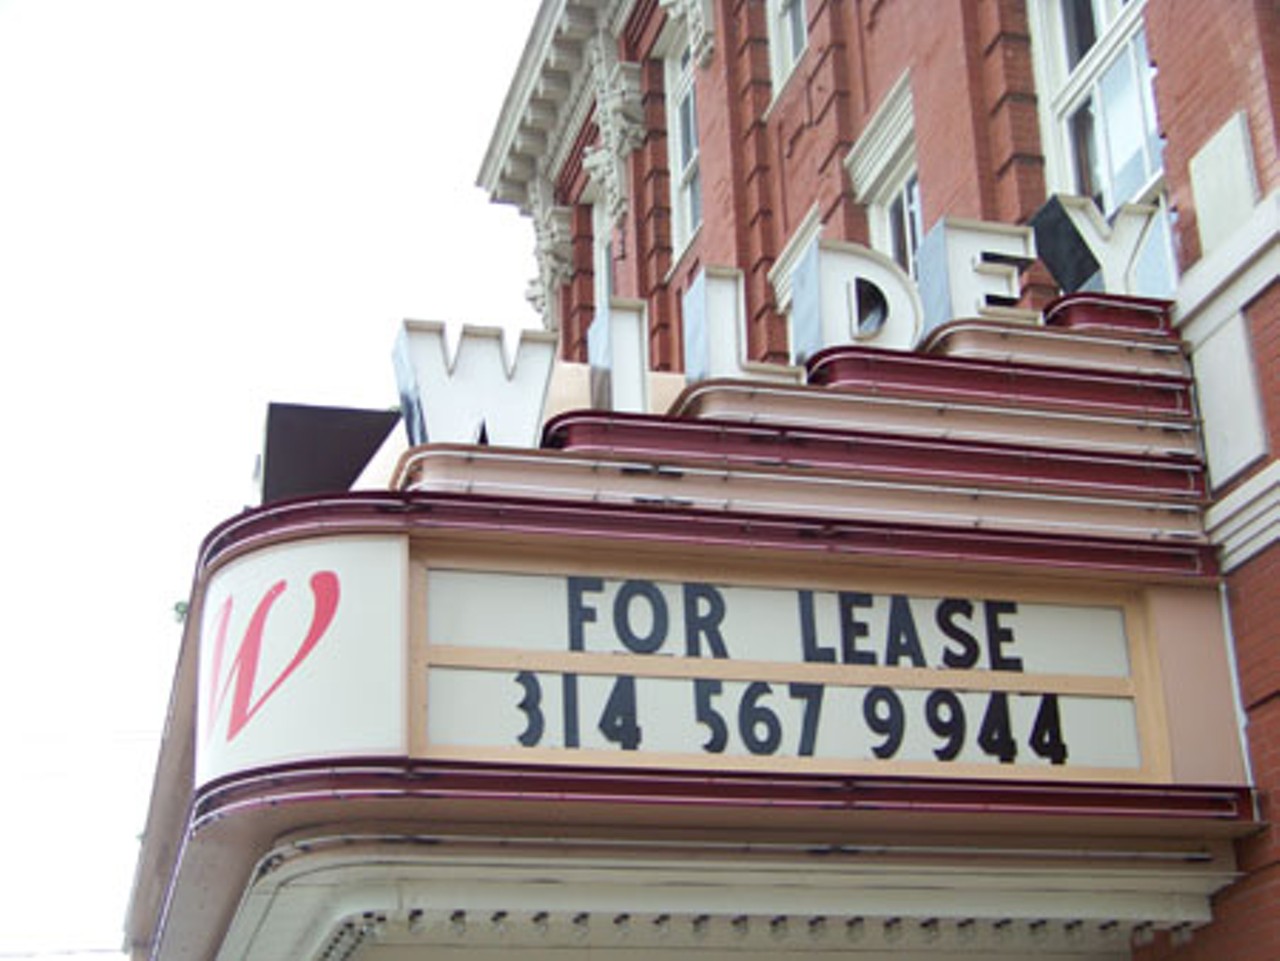 ...But theater's owners apparently are still looking for a tenant.